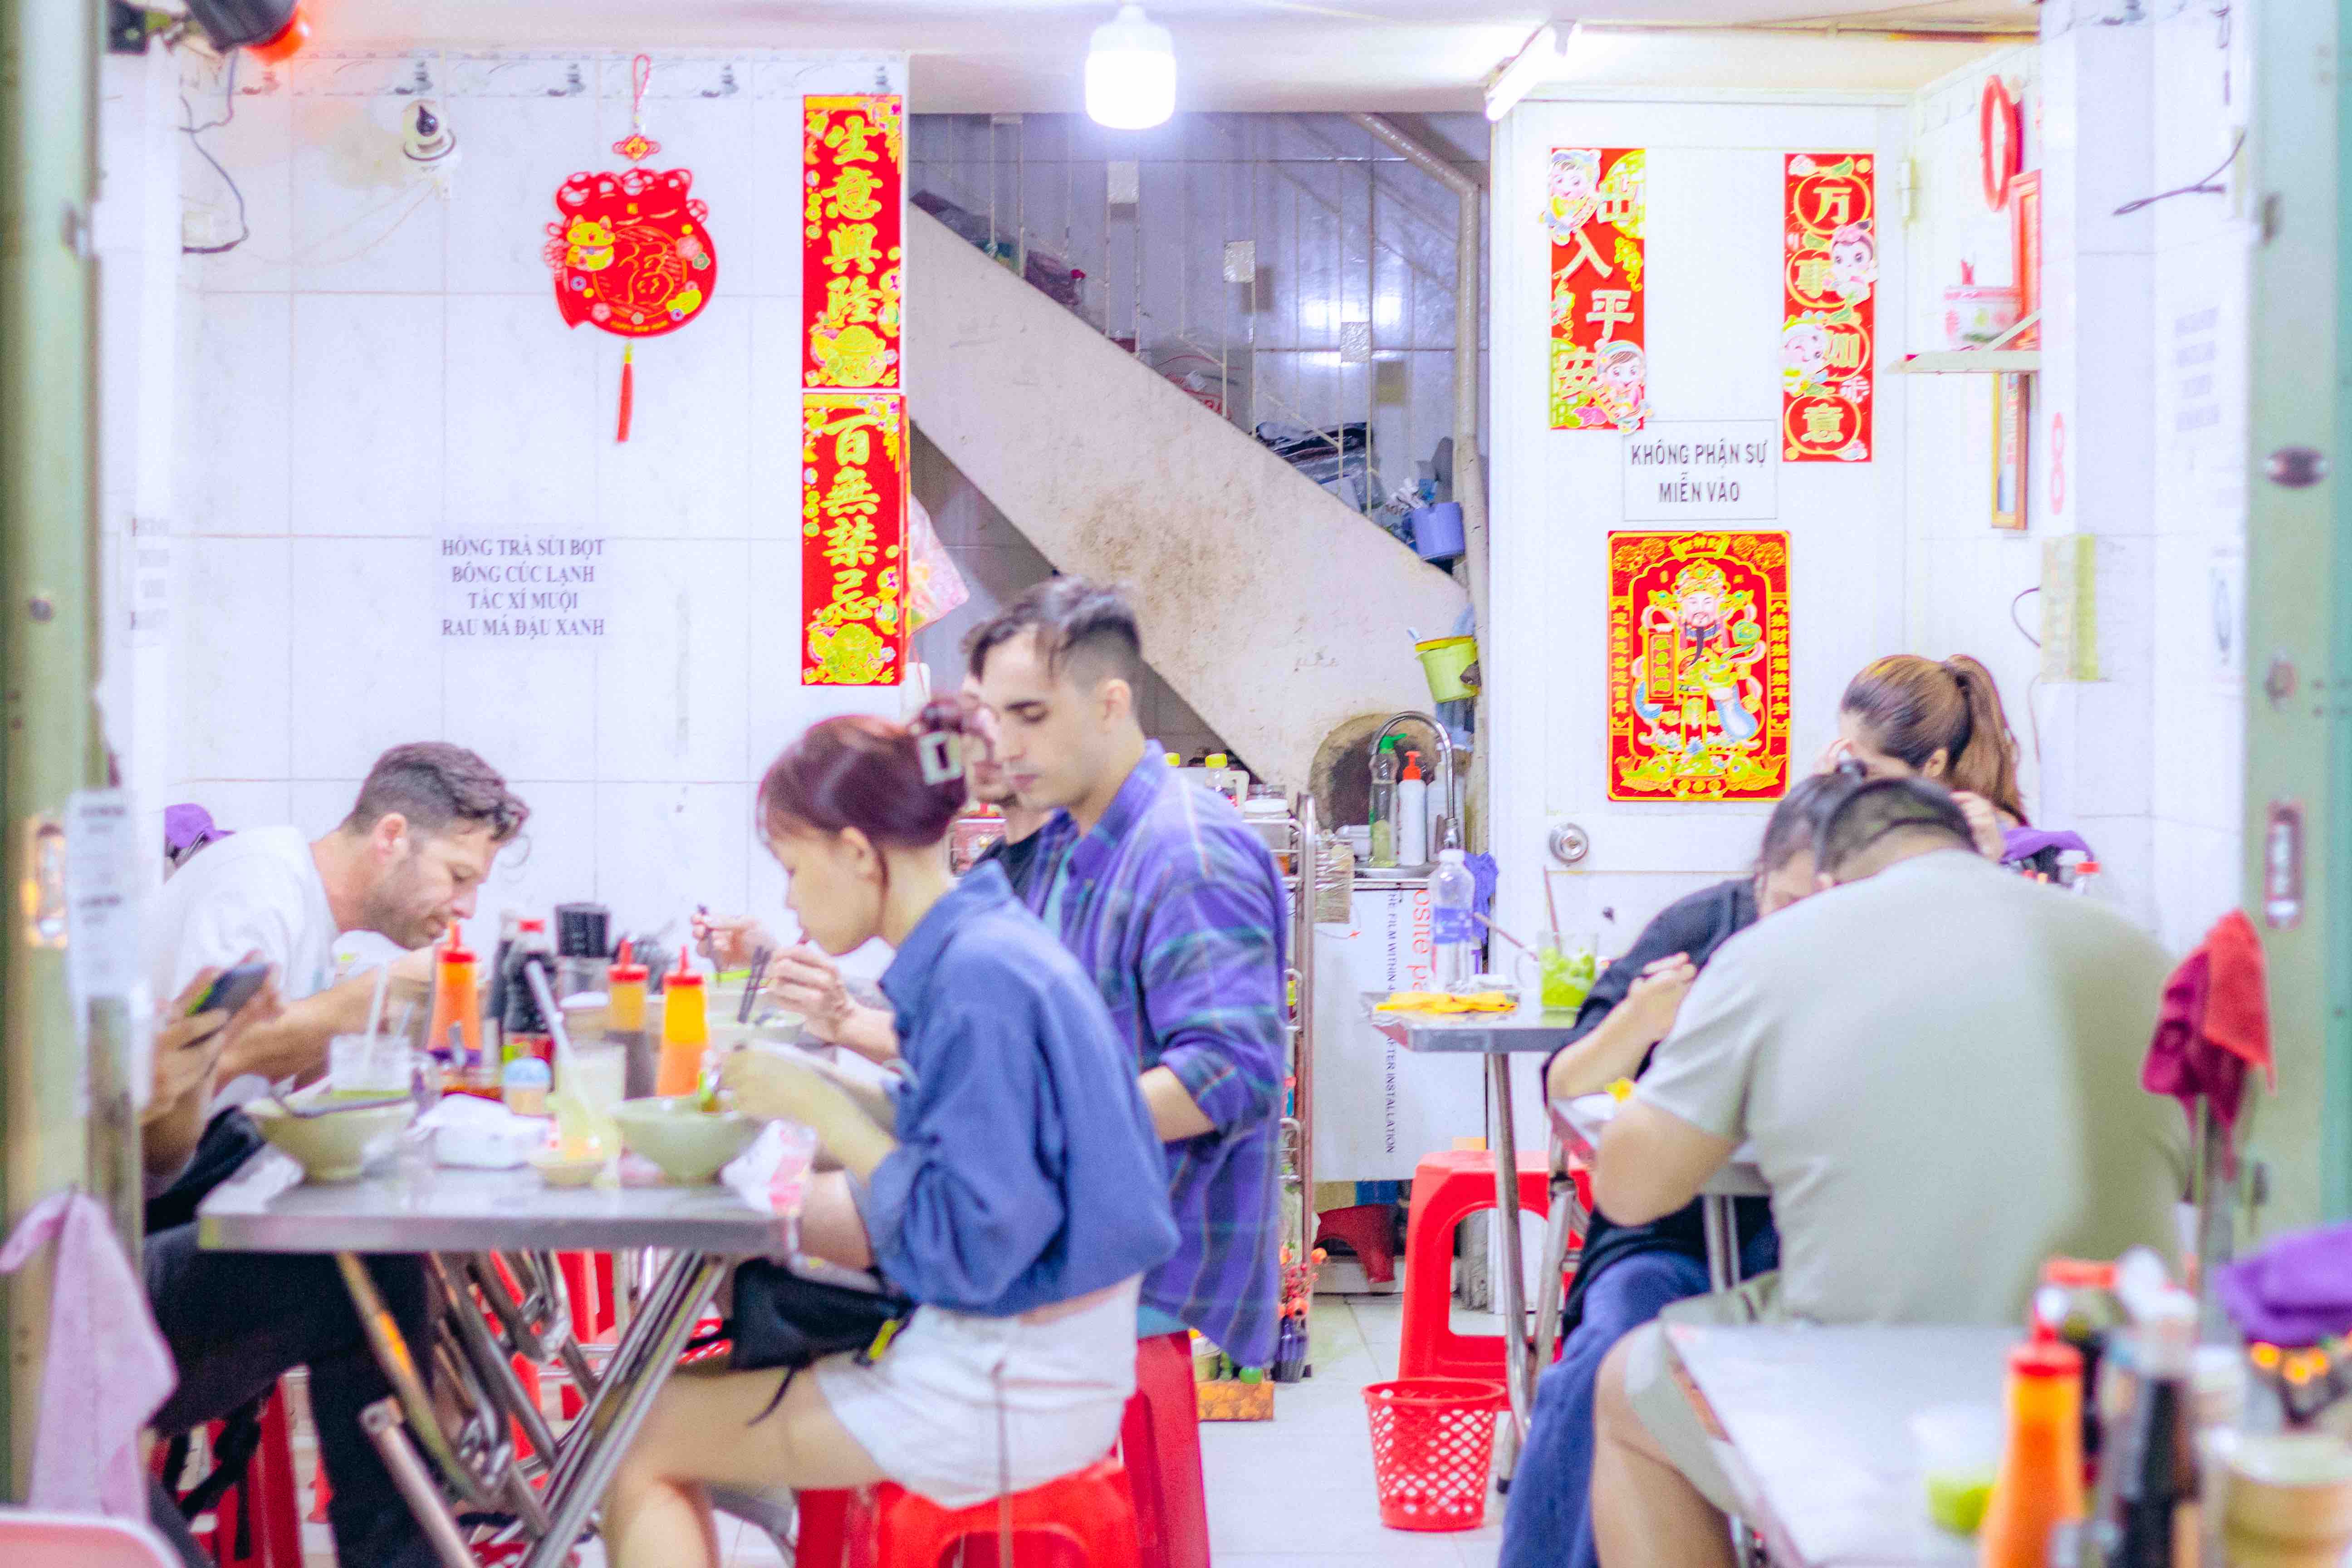 Diners enjoy shuijiao at a stall on Ha Ton Quyen Street, District 11, Ho Chi Minh City. Photo: Linh To / Tuoi Tre News